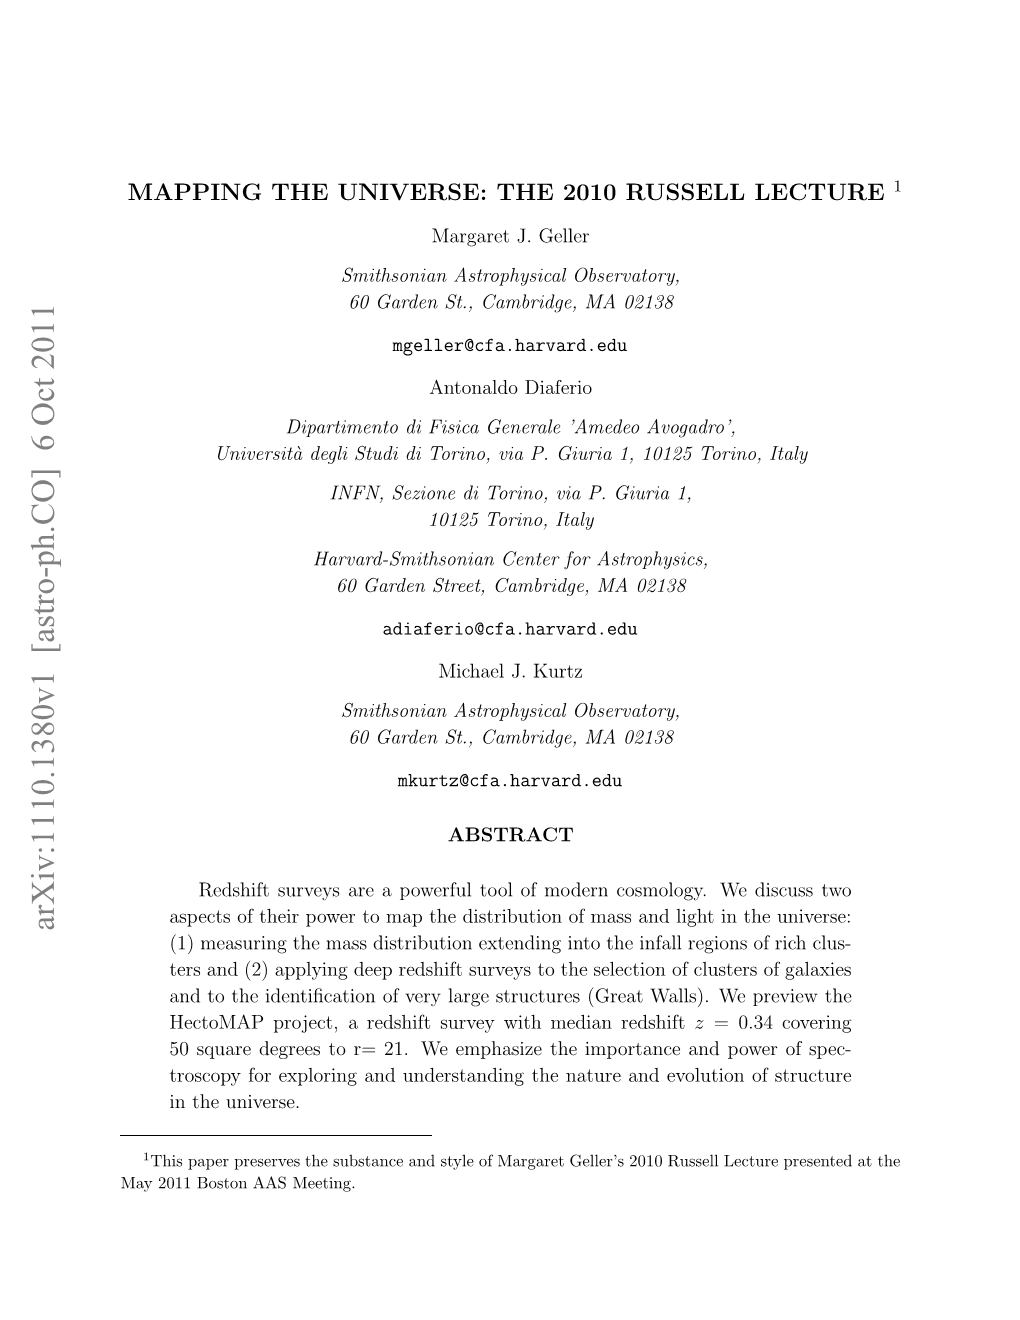 Mapping the Universe: the 2010 Russell Lecture